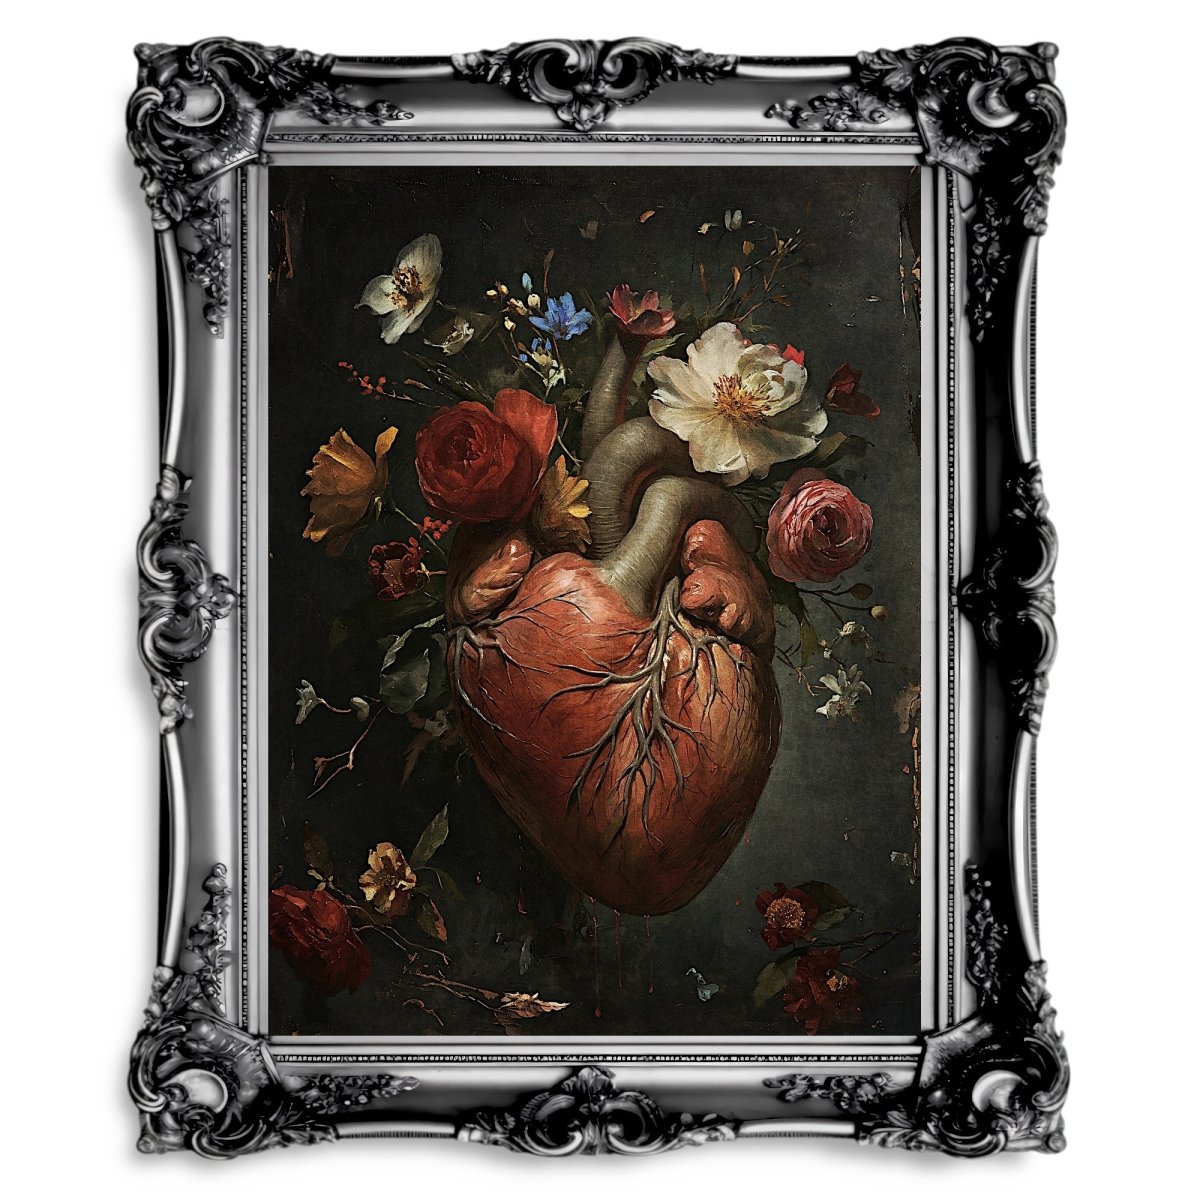 Macabre Valentine Wall Art Antique Oil Painting Human Heart with Flowers Creepy Gothic Decor Goblincore Decor Dark Romance Print Paper Poster Print - Everything Pixel